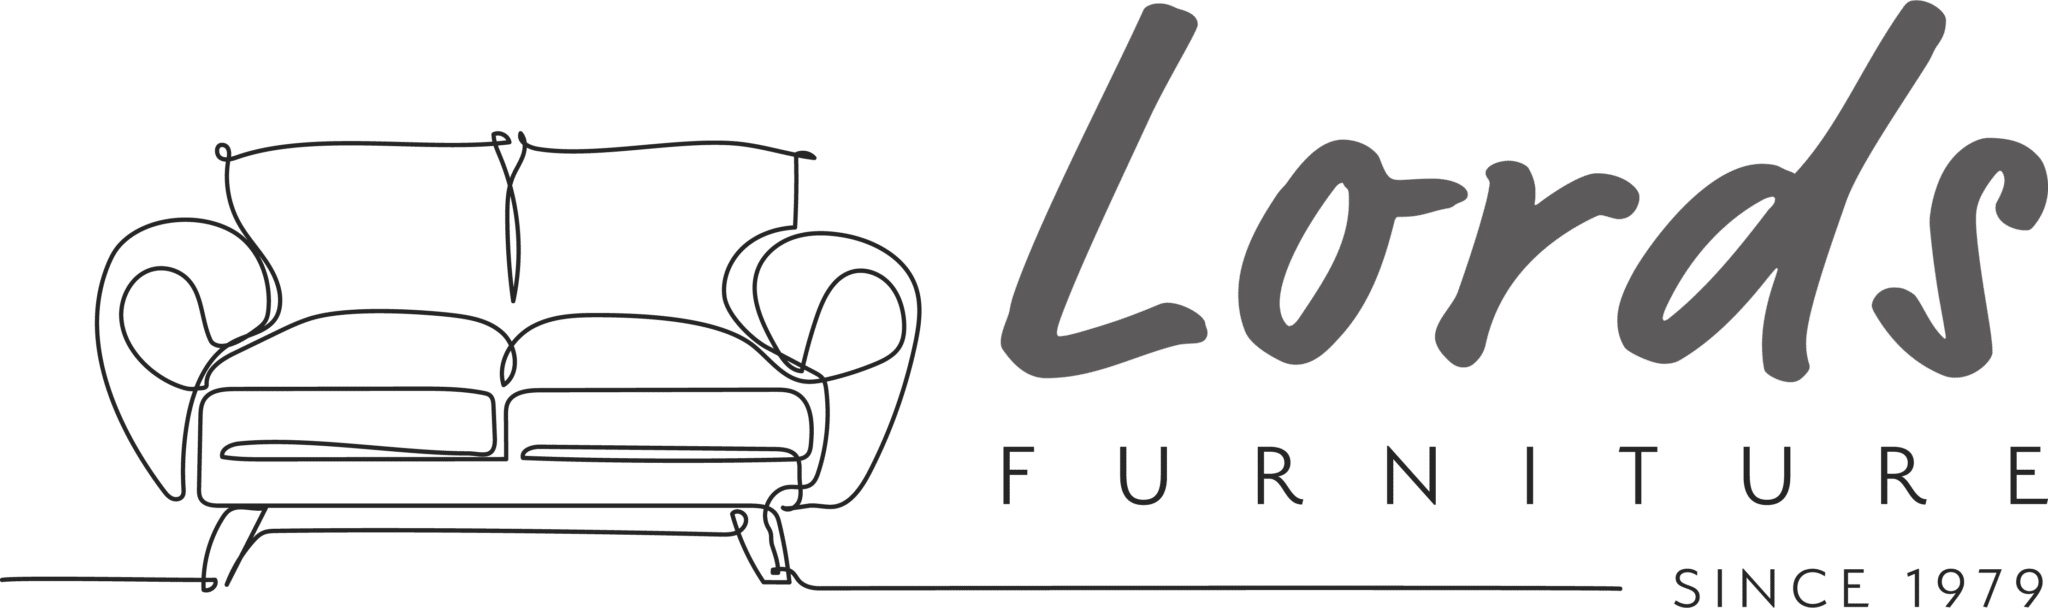 Lords Furniture